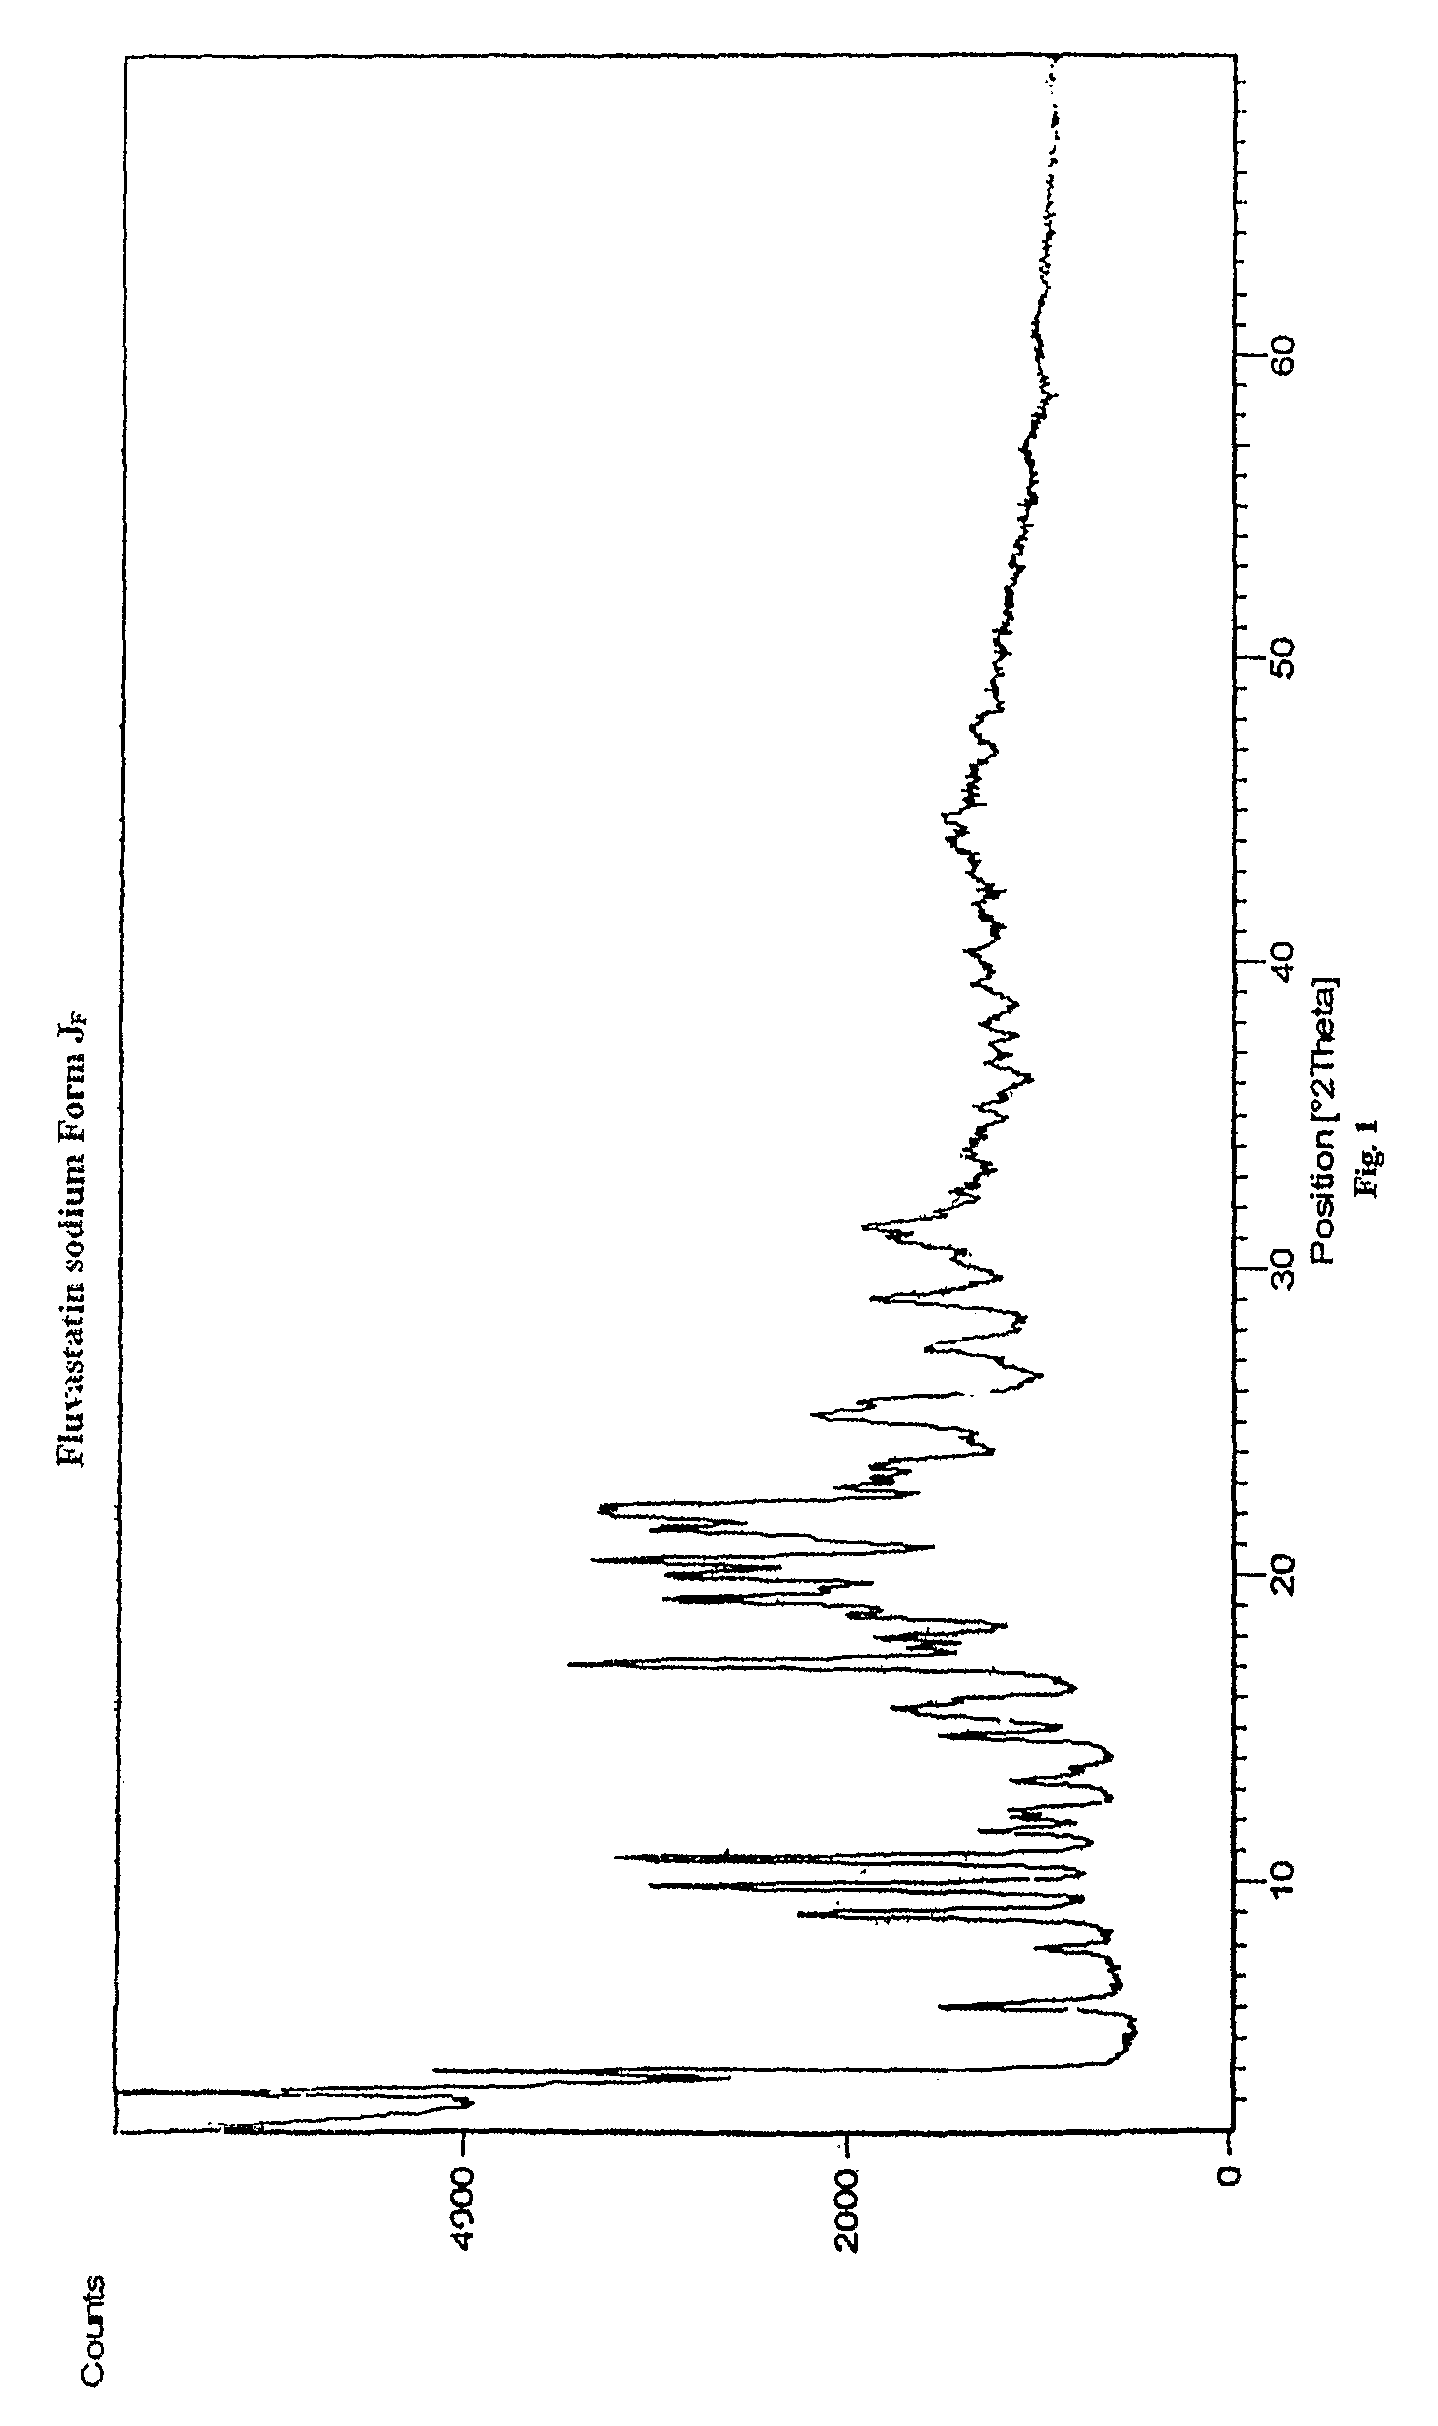 Polymorphic forms of fluvastatin sodium and process for preparing the same